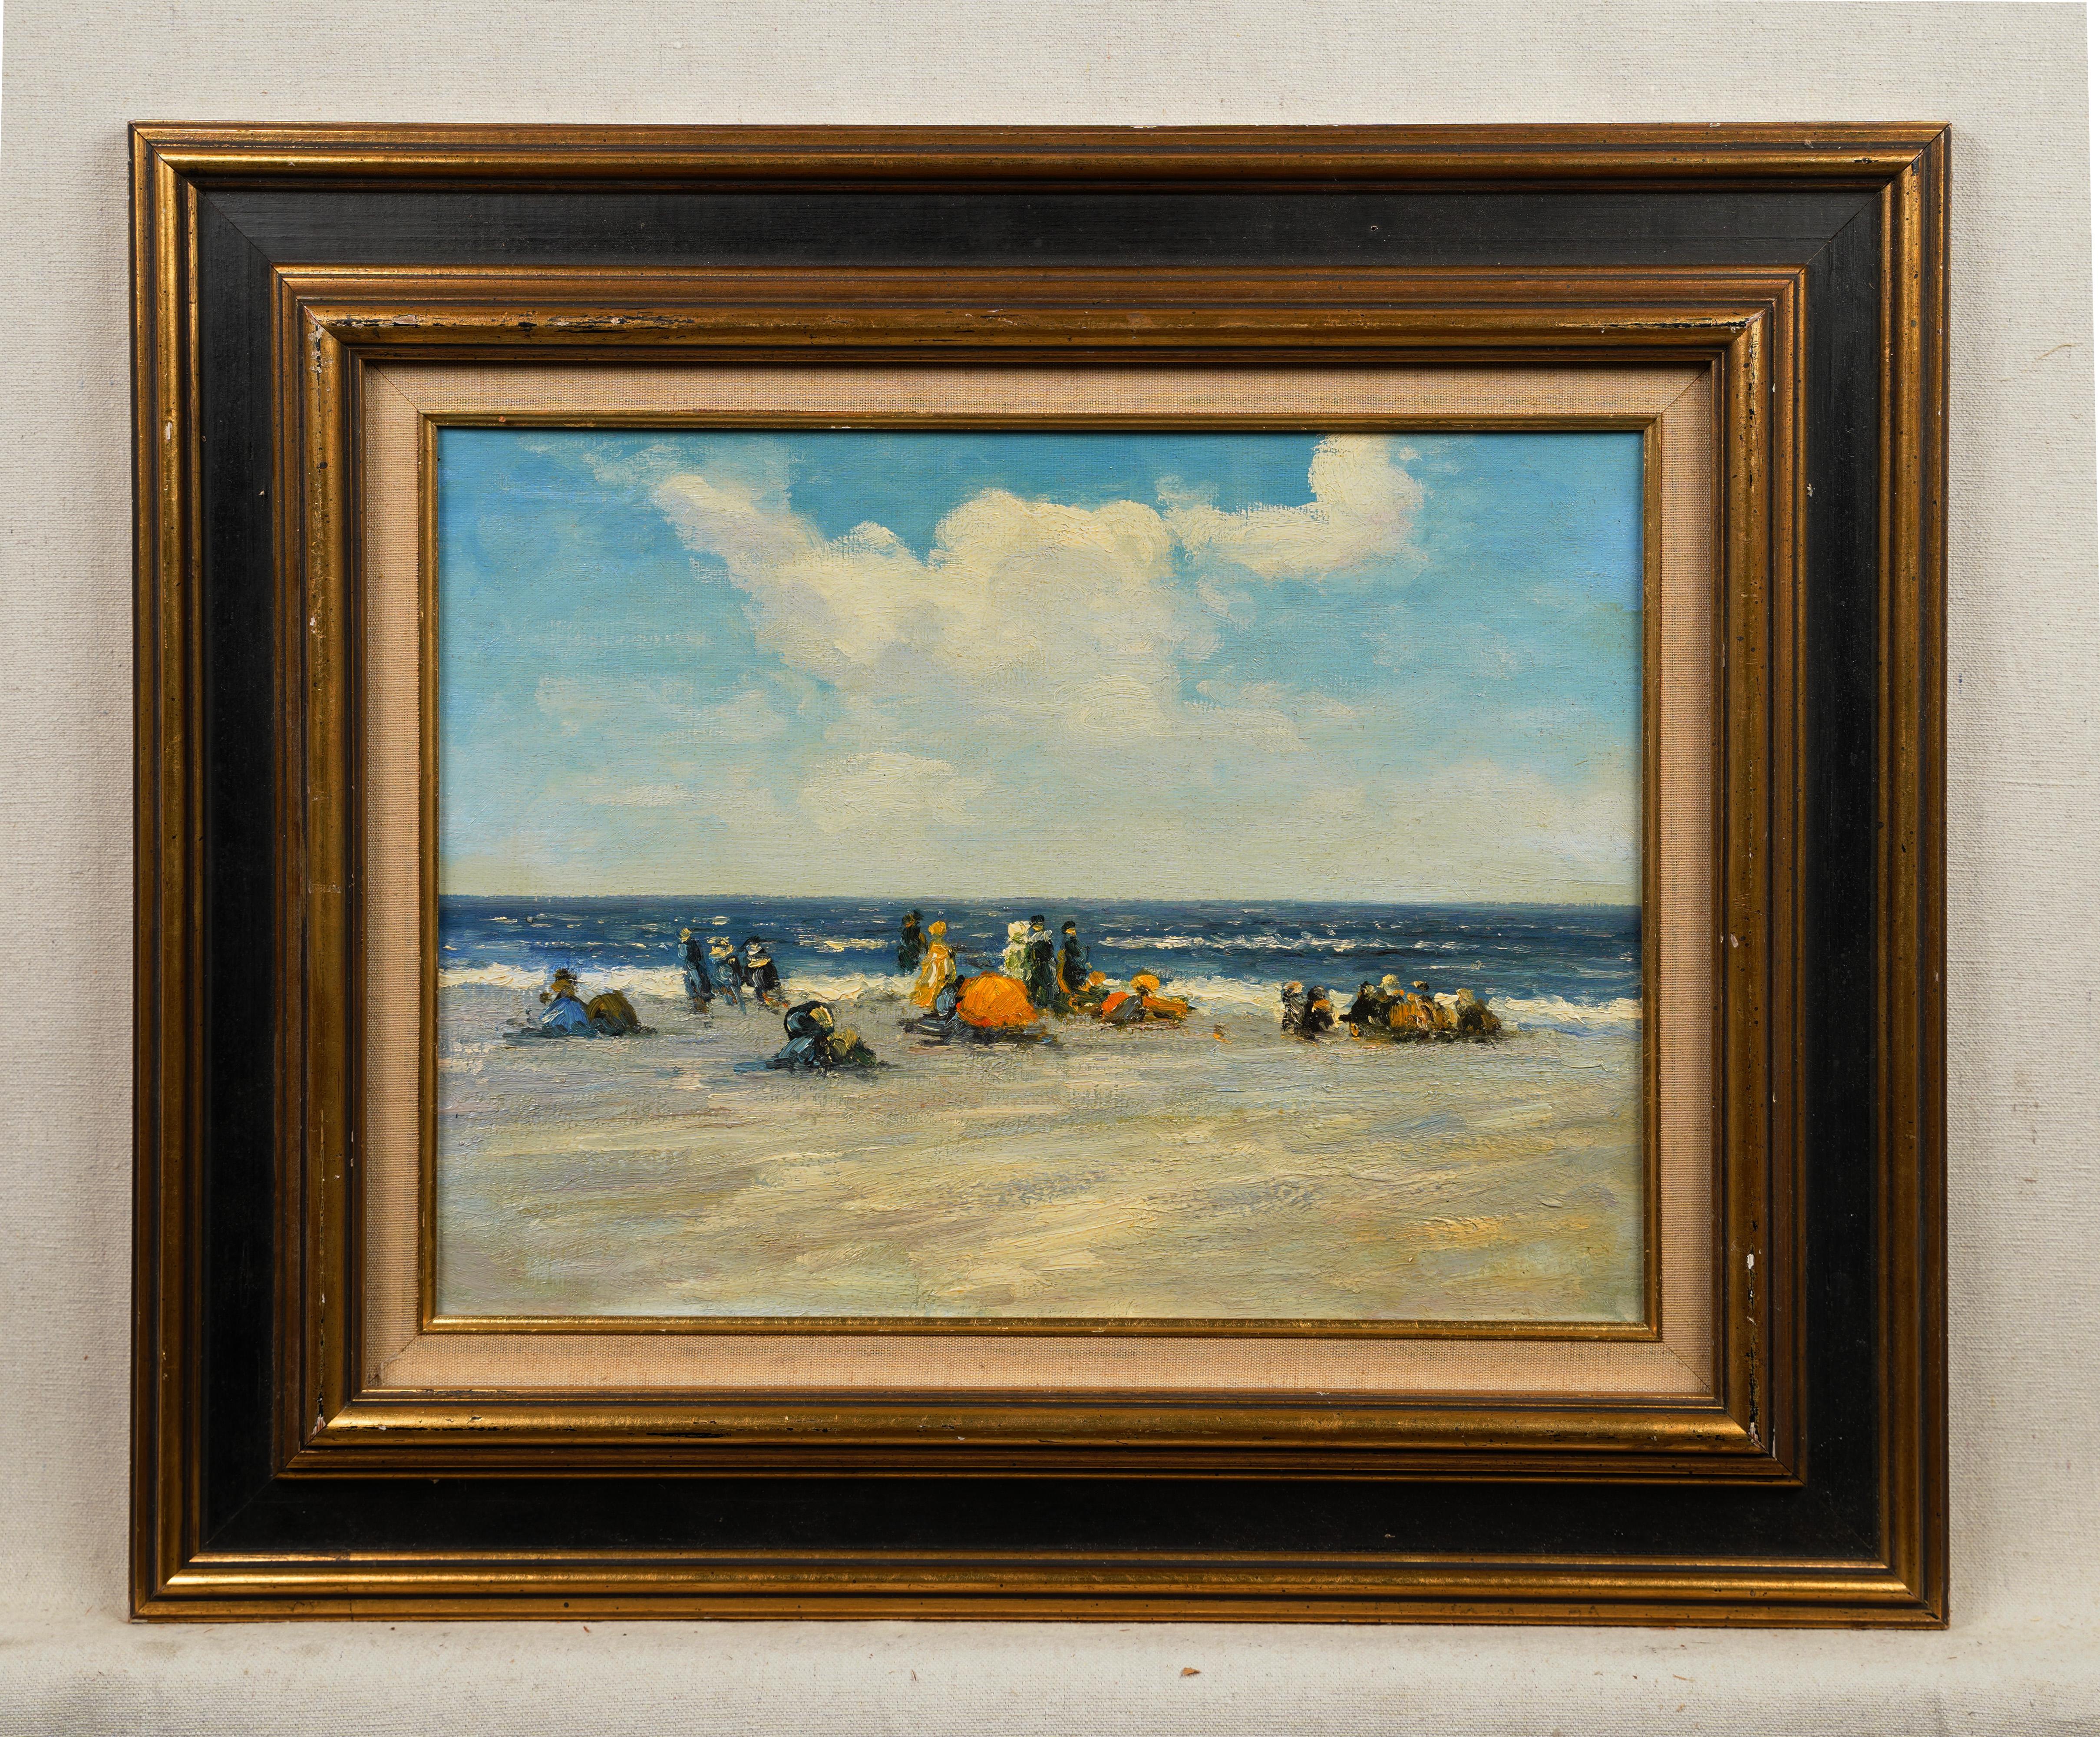 Antique American impressionist seascape beach scene oil painting.  Oil on board.  No signature found.  Framed.  Image size, 18L x 14H.